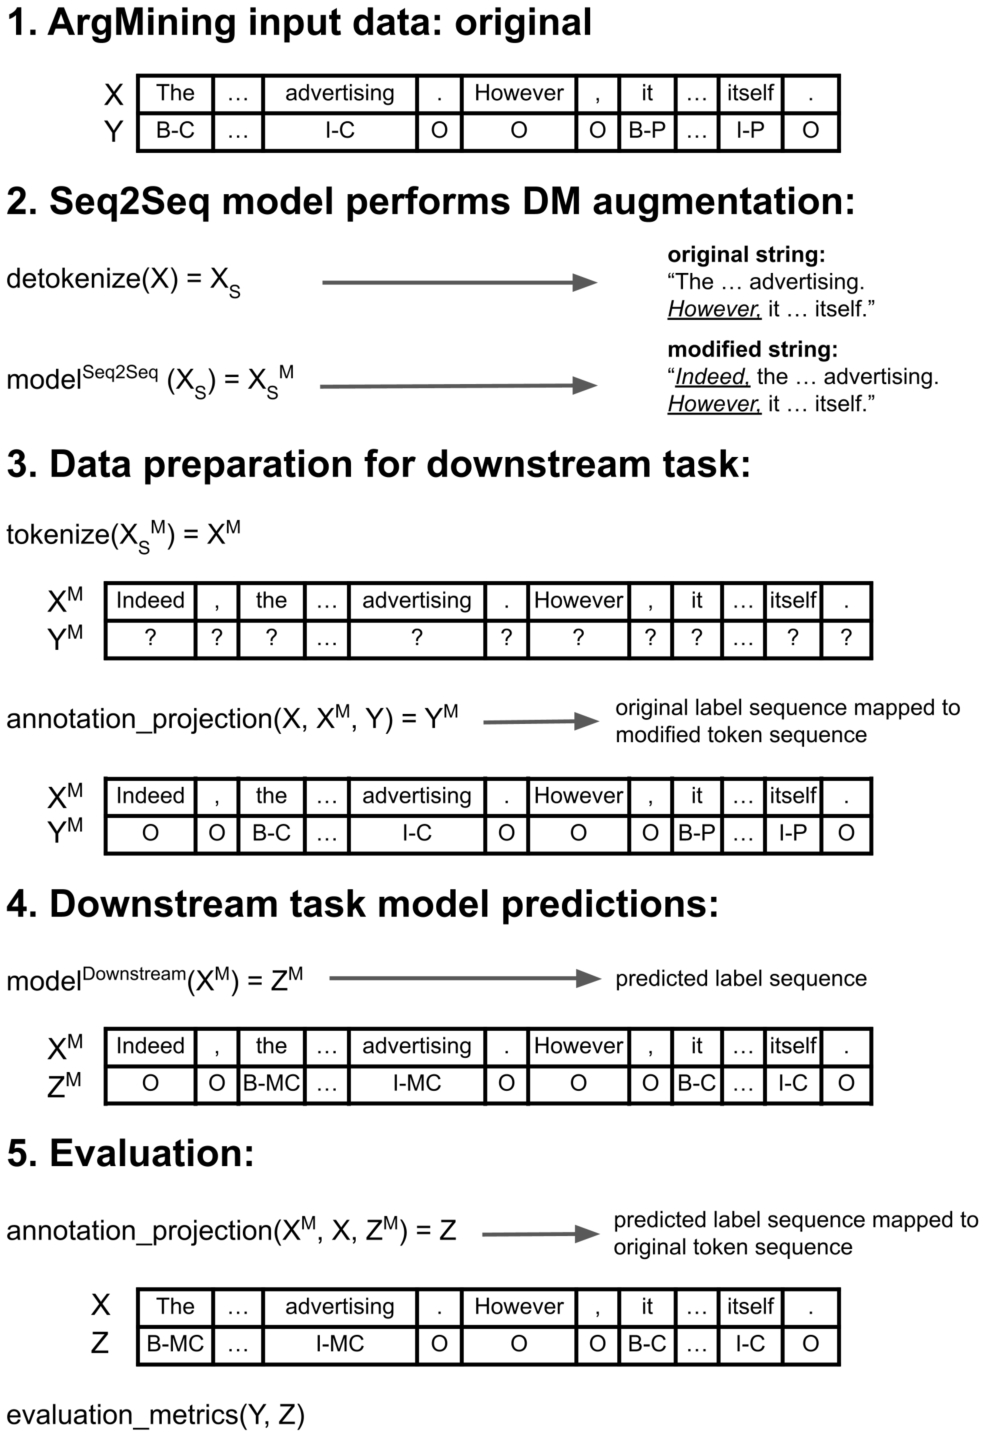 Downstream task experimental setup process (details provided in Section 6.1).